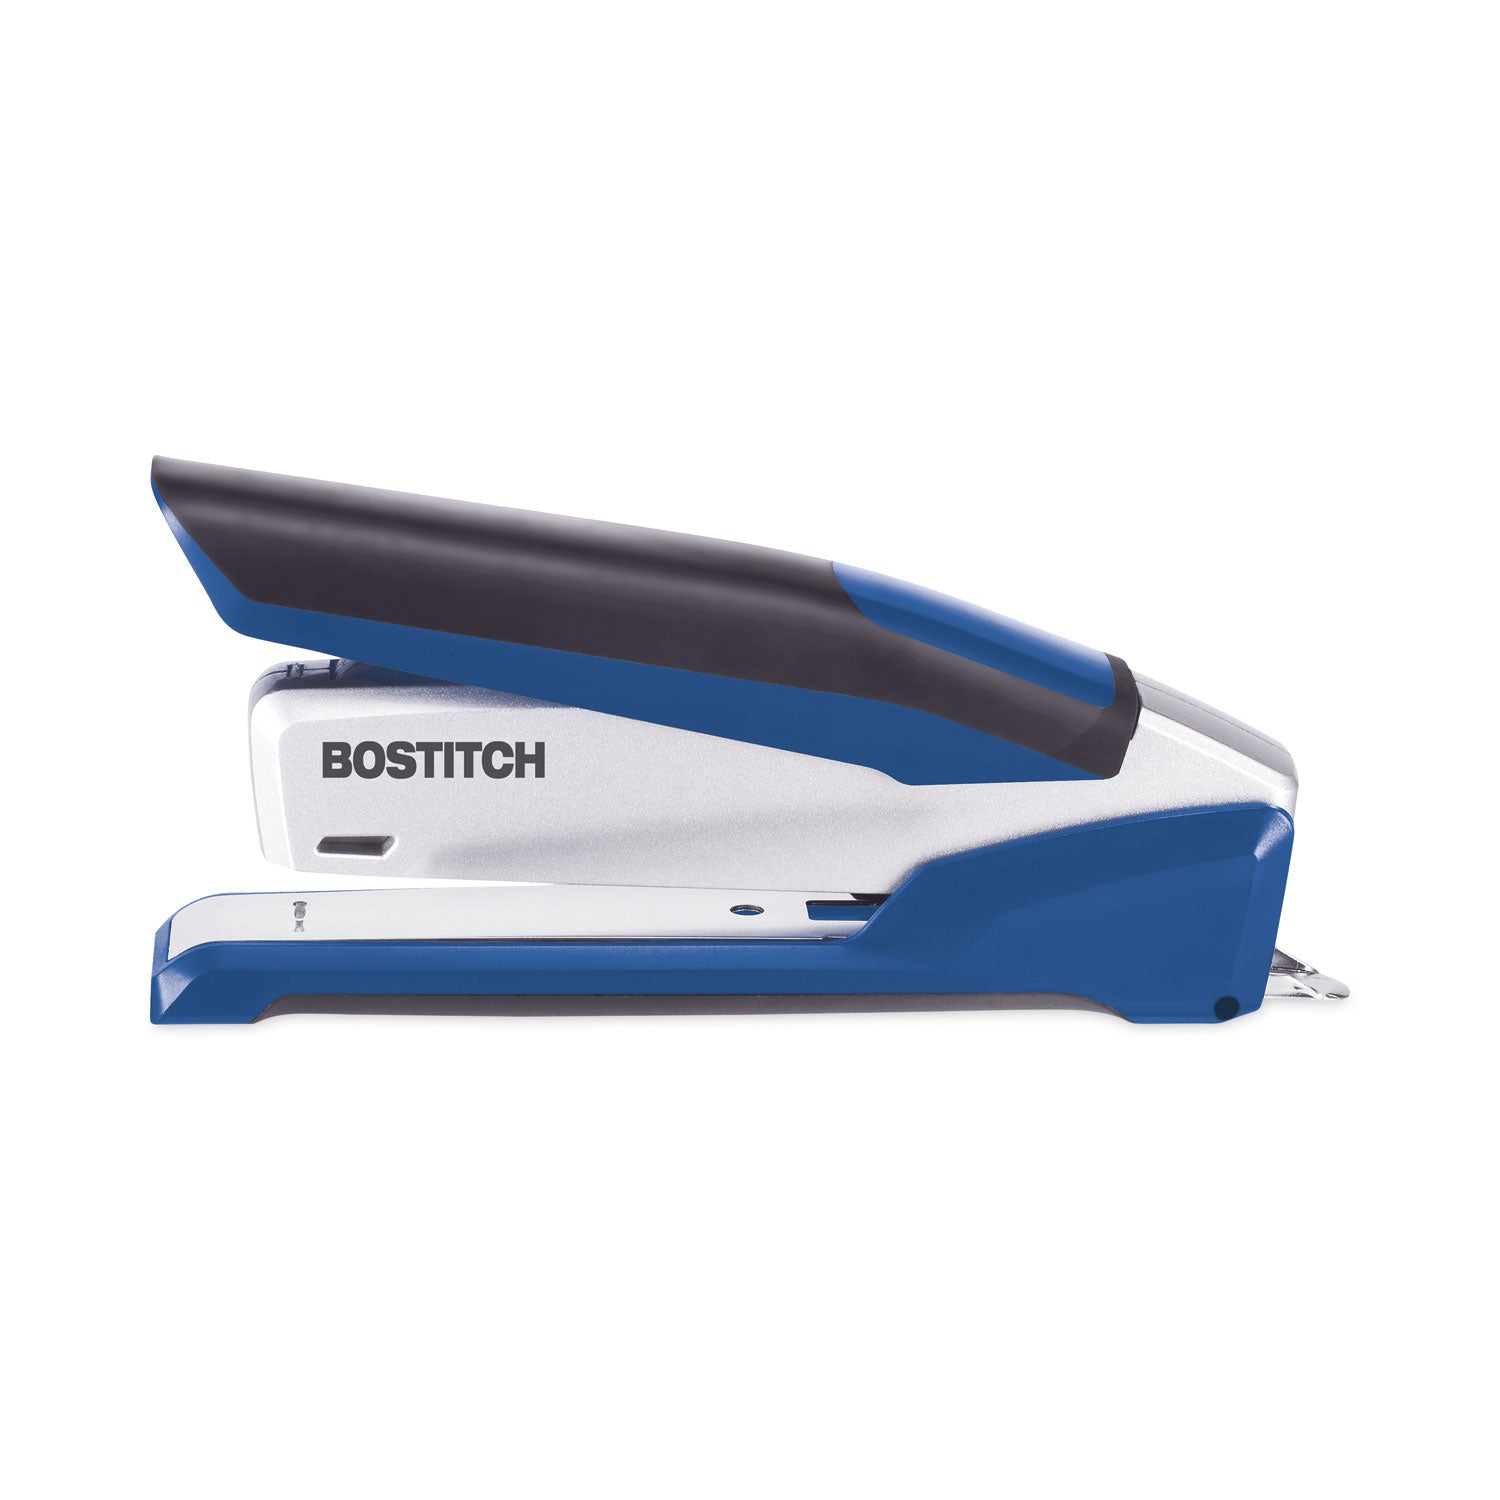 InPower One-Finger 3-in-1 Desktop Stapler with Antimicrobial Protection, 28-Sheet Capacity, Blue/Silver - 